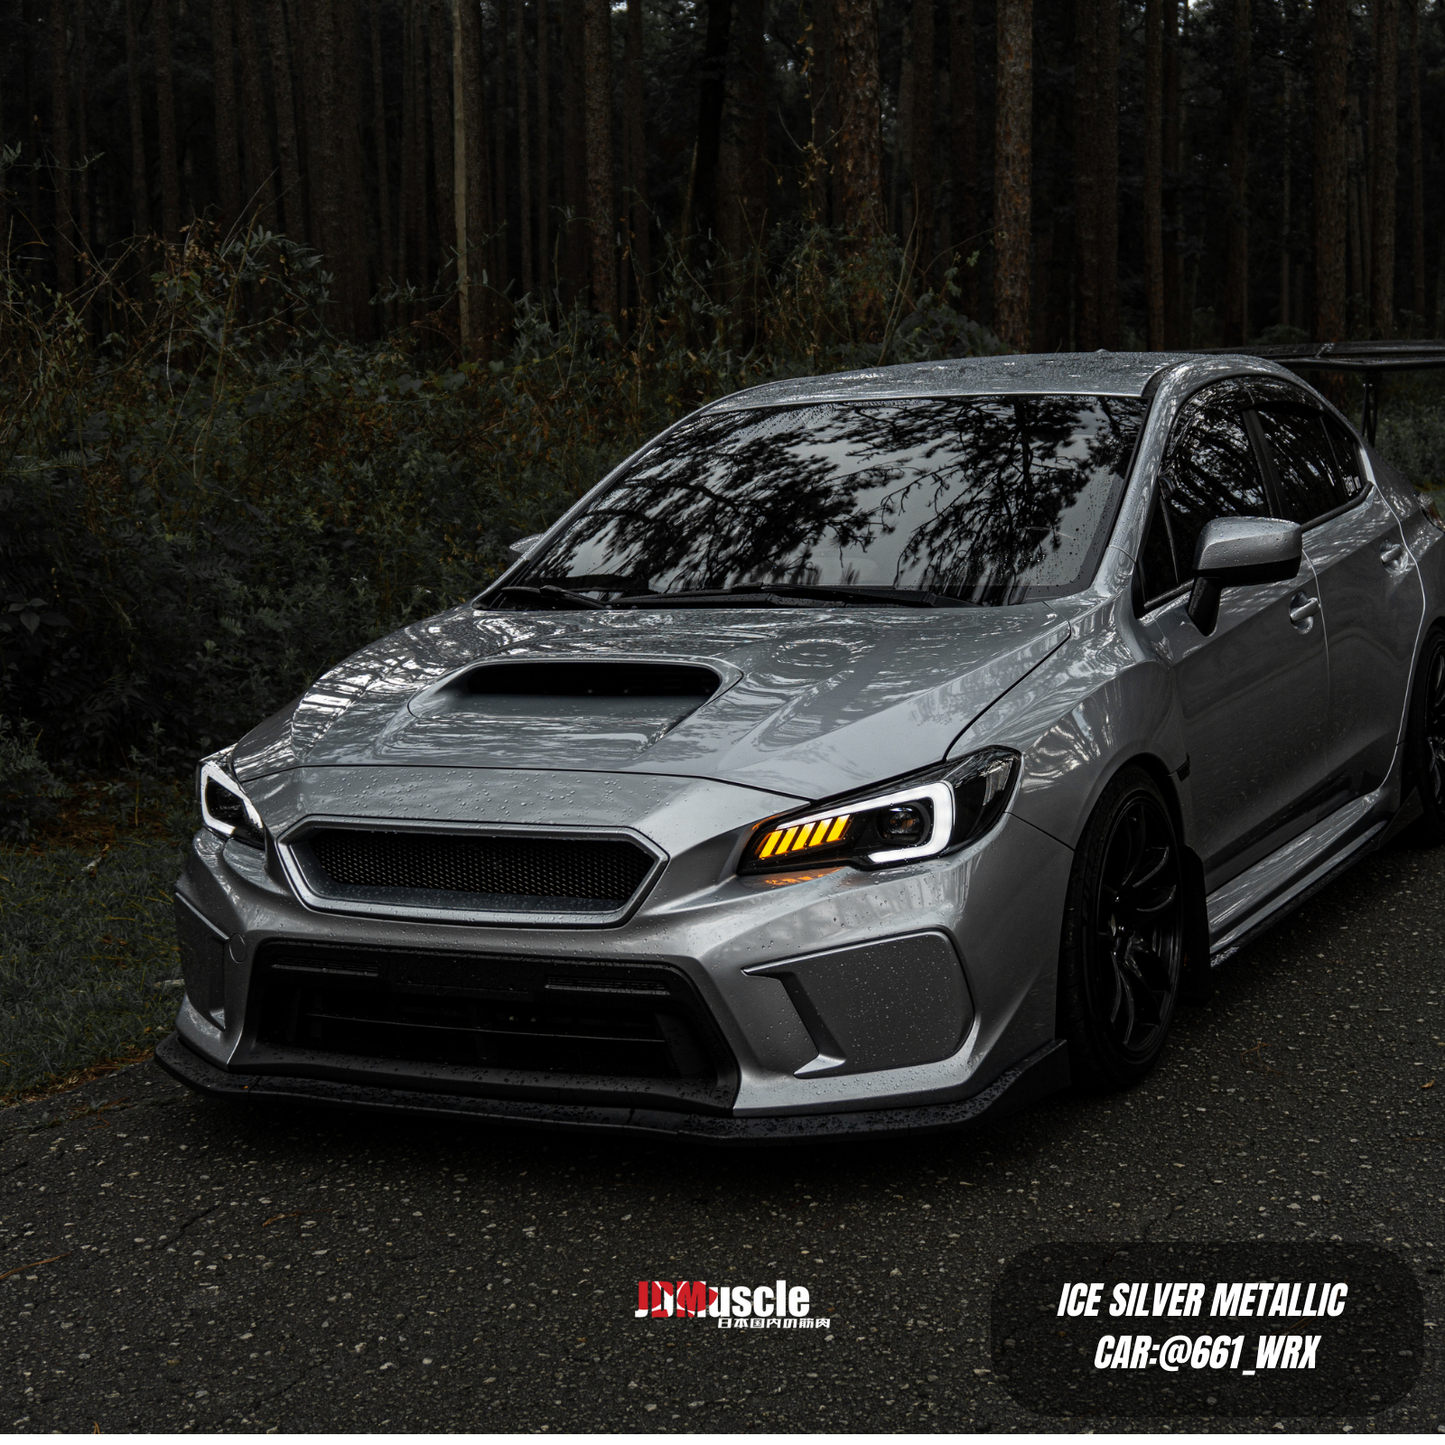 JDMuscle 18-21 WRX/STI Grille V2 | Paint Matched / Gloss Black | CS Style | ABS